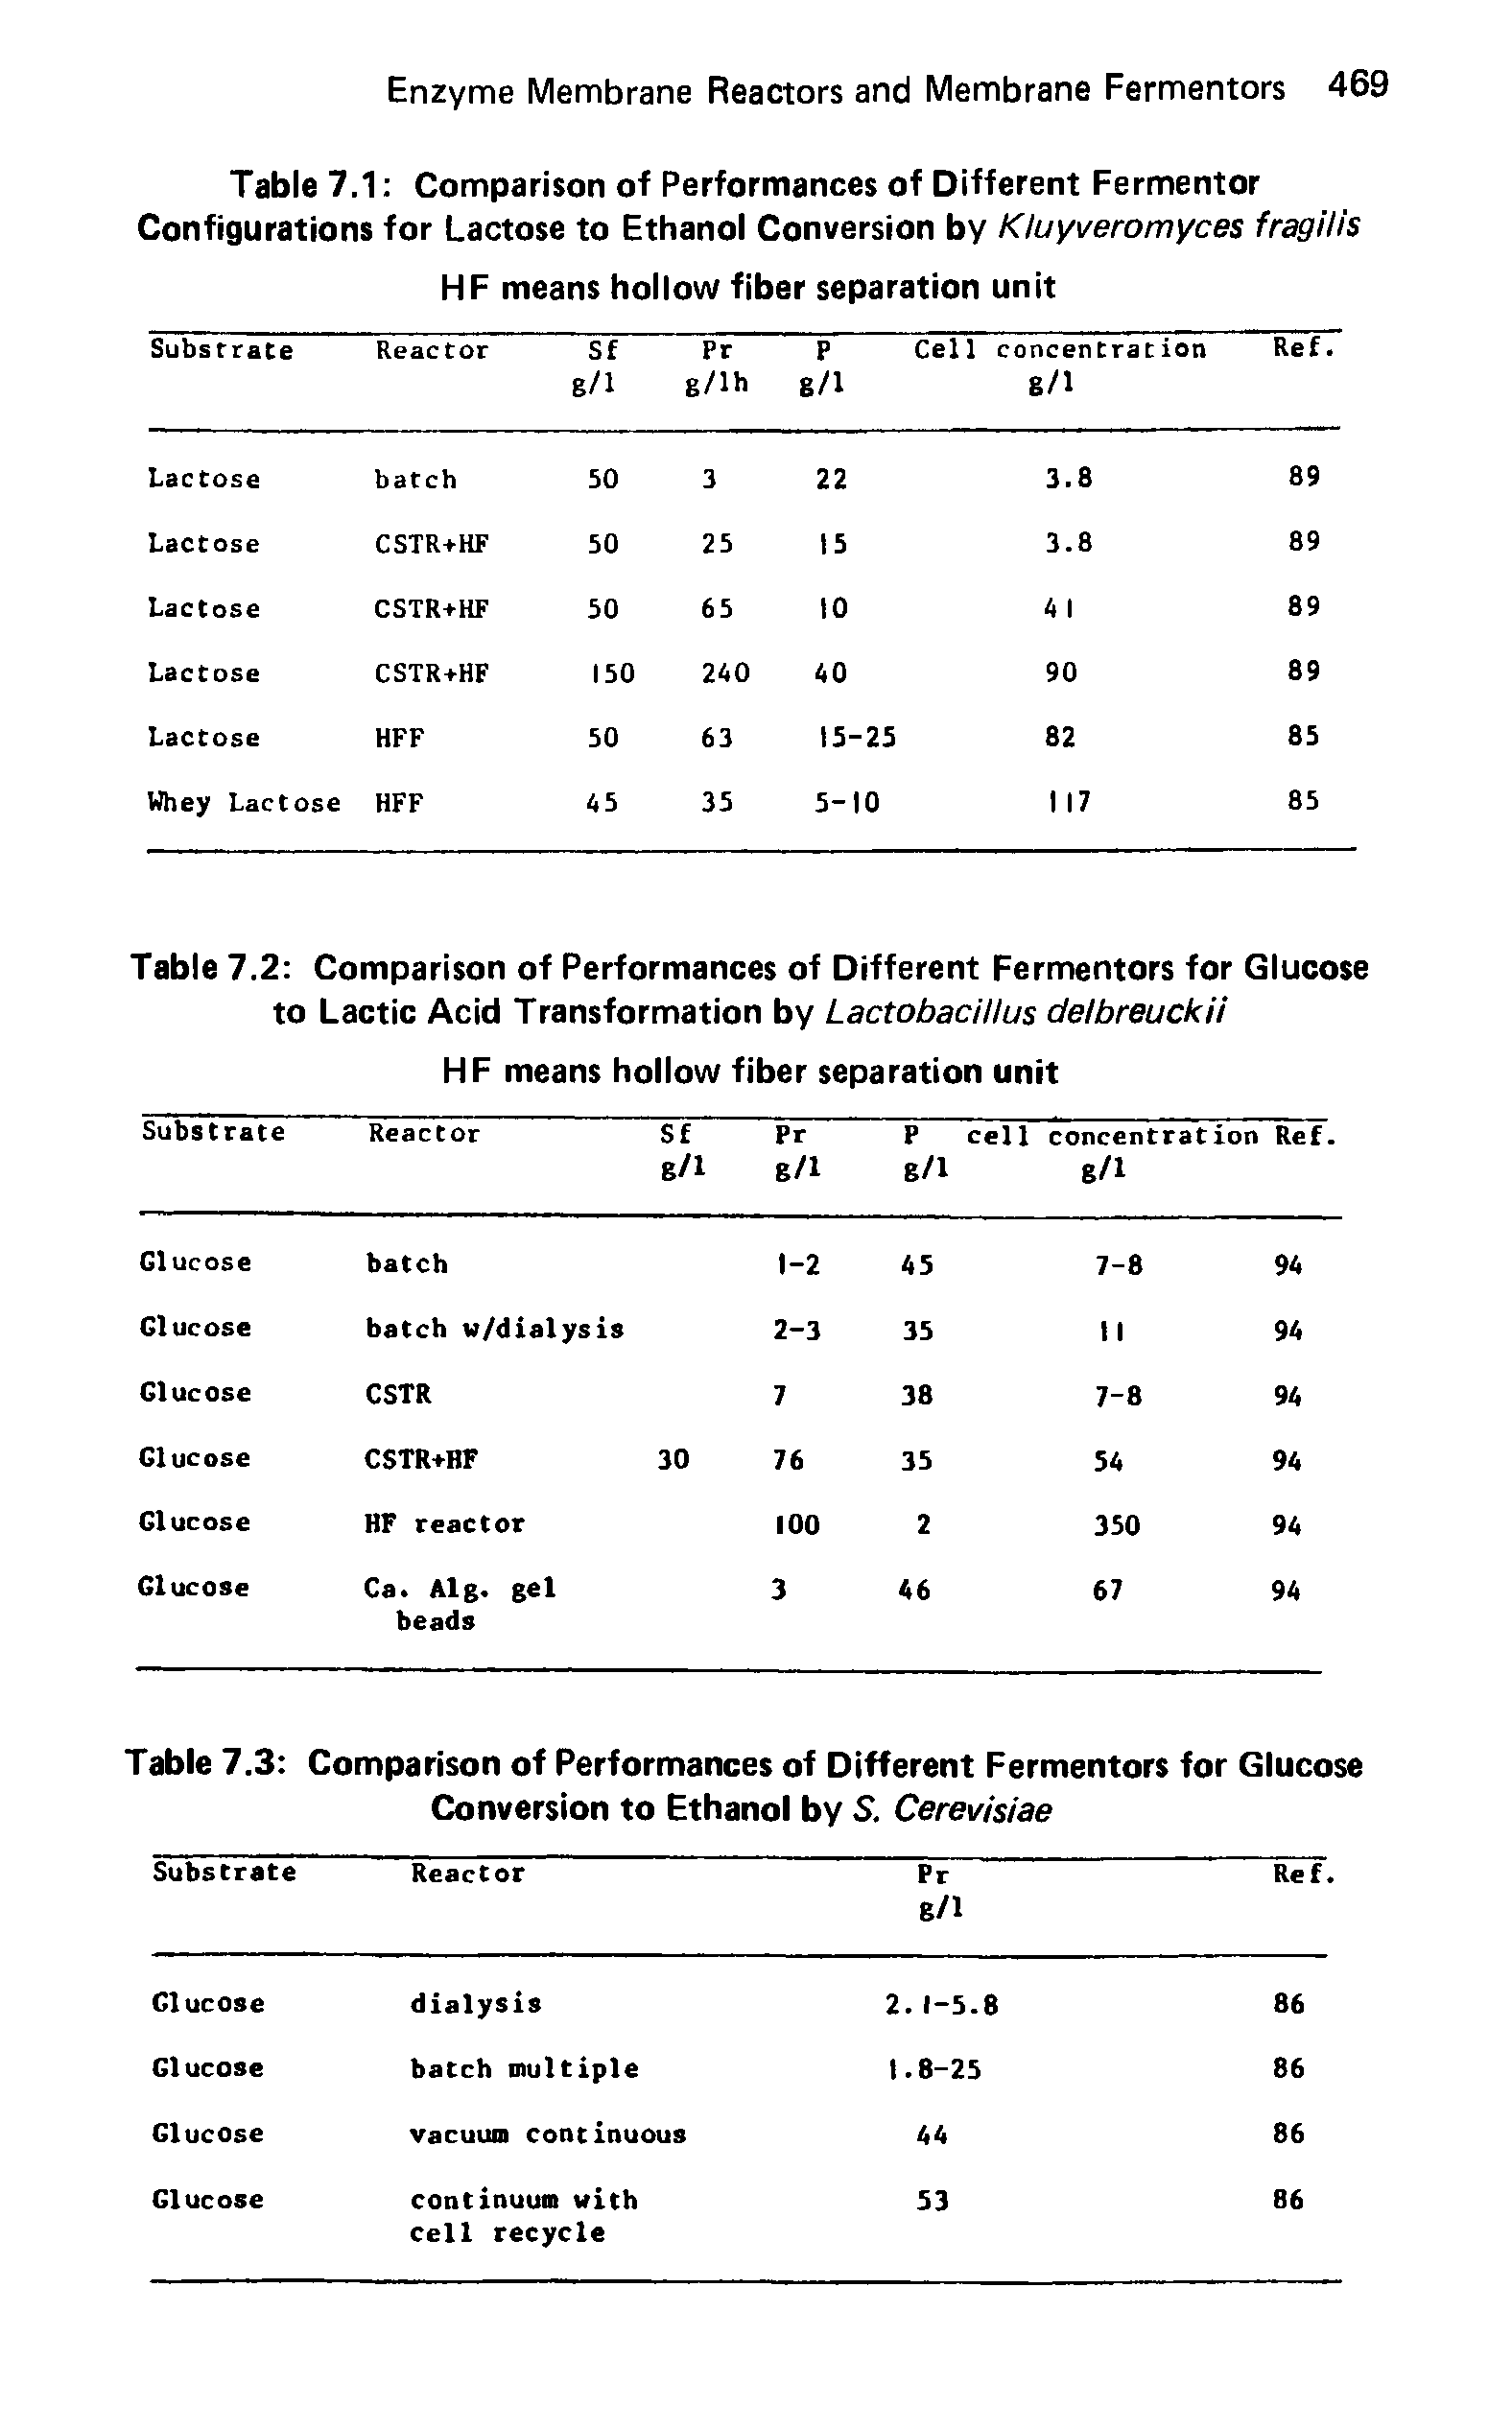 Table 7.1 Comparison of Performances of Different Fermentor Configurations for Lactose to Ethanol Conversion by Kluyveromyces fragilis...